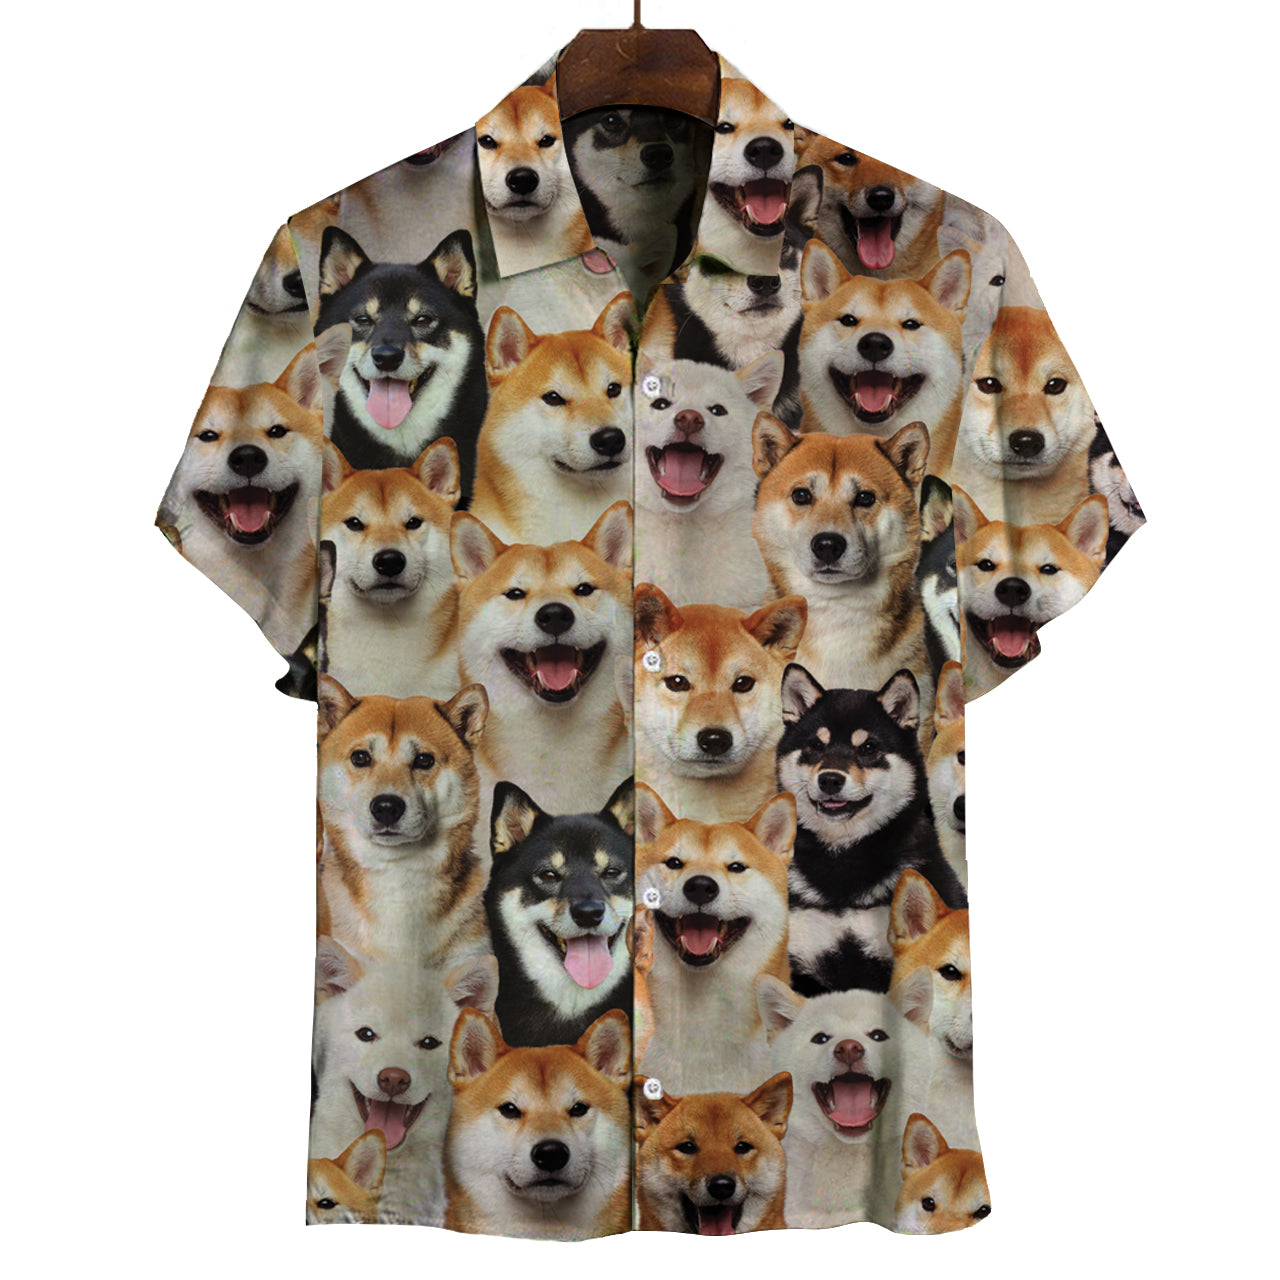 You Will Have A Bunch Of Shiba Inus - Shirt V1